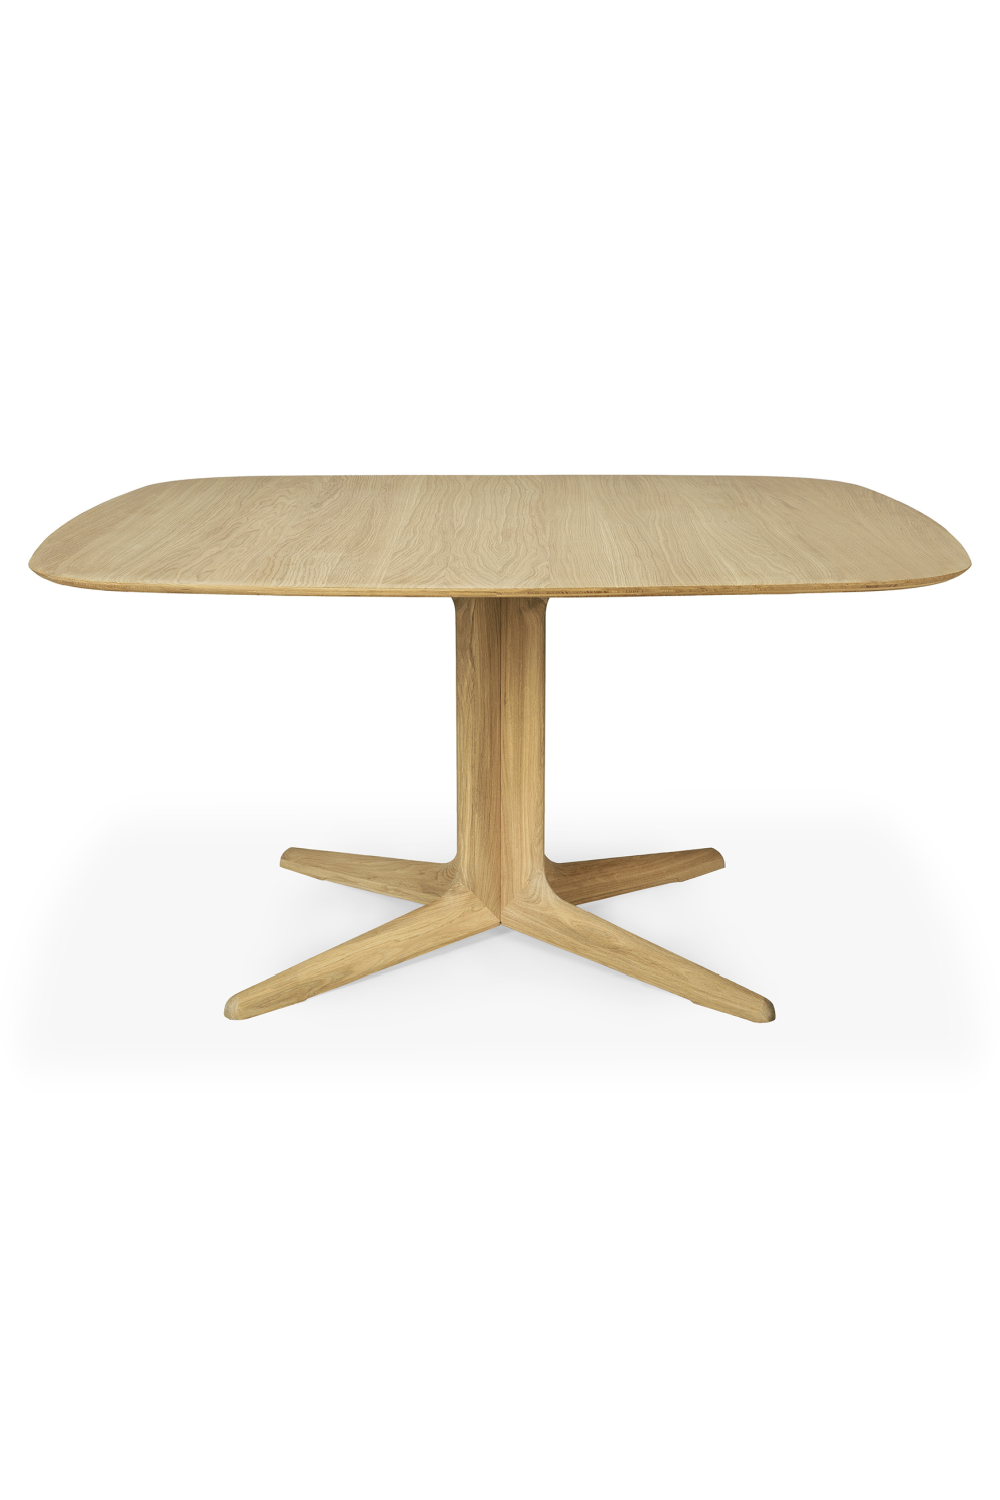 Central-Footed Oak Dining Table | Ethnicraft Corto | Oroa.com